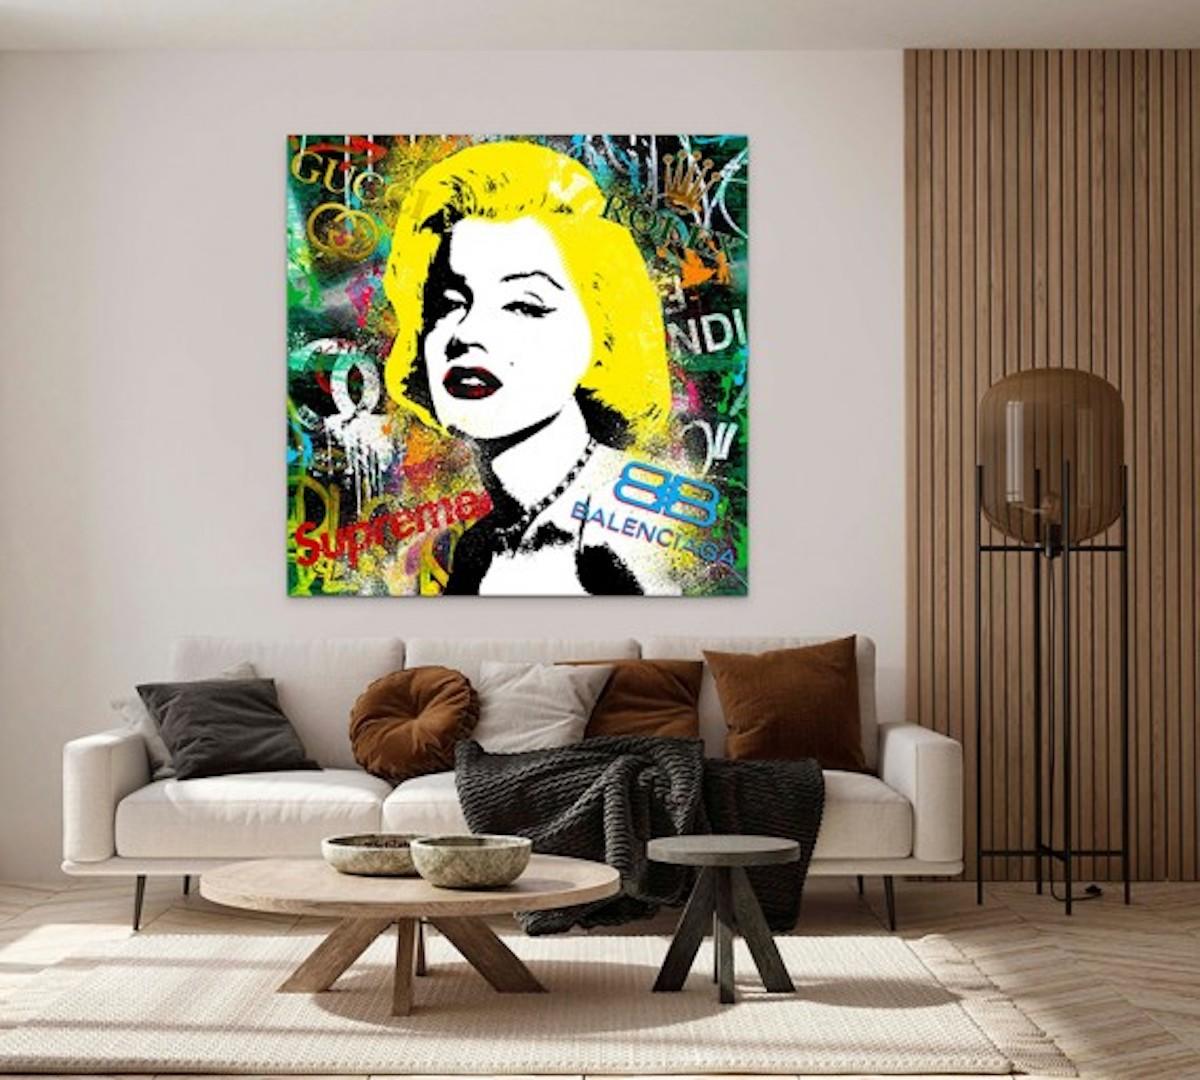 Marilyn as Chérie Ledoux, Pop art, Still-life, Colourful art, Abstract, original - Painting by Agent X